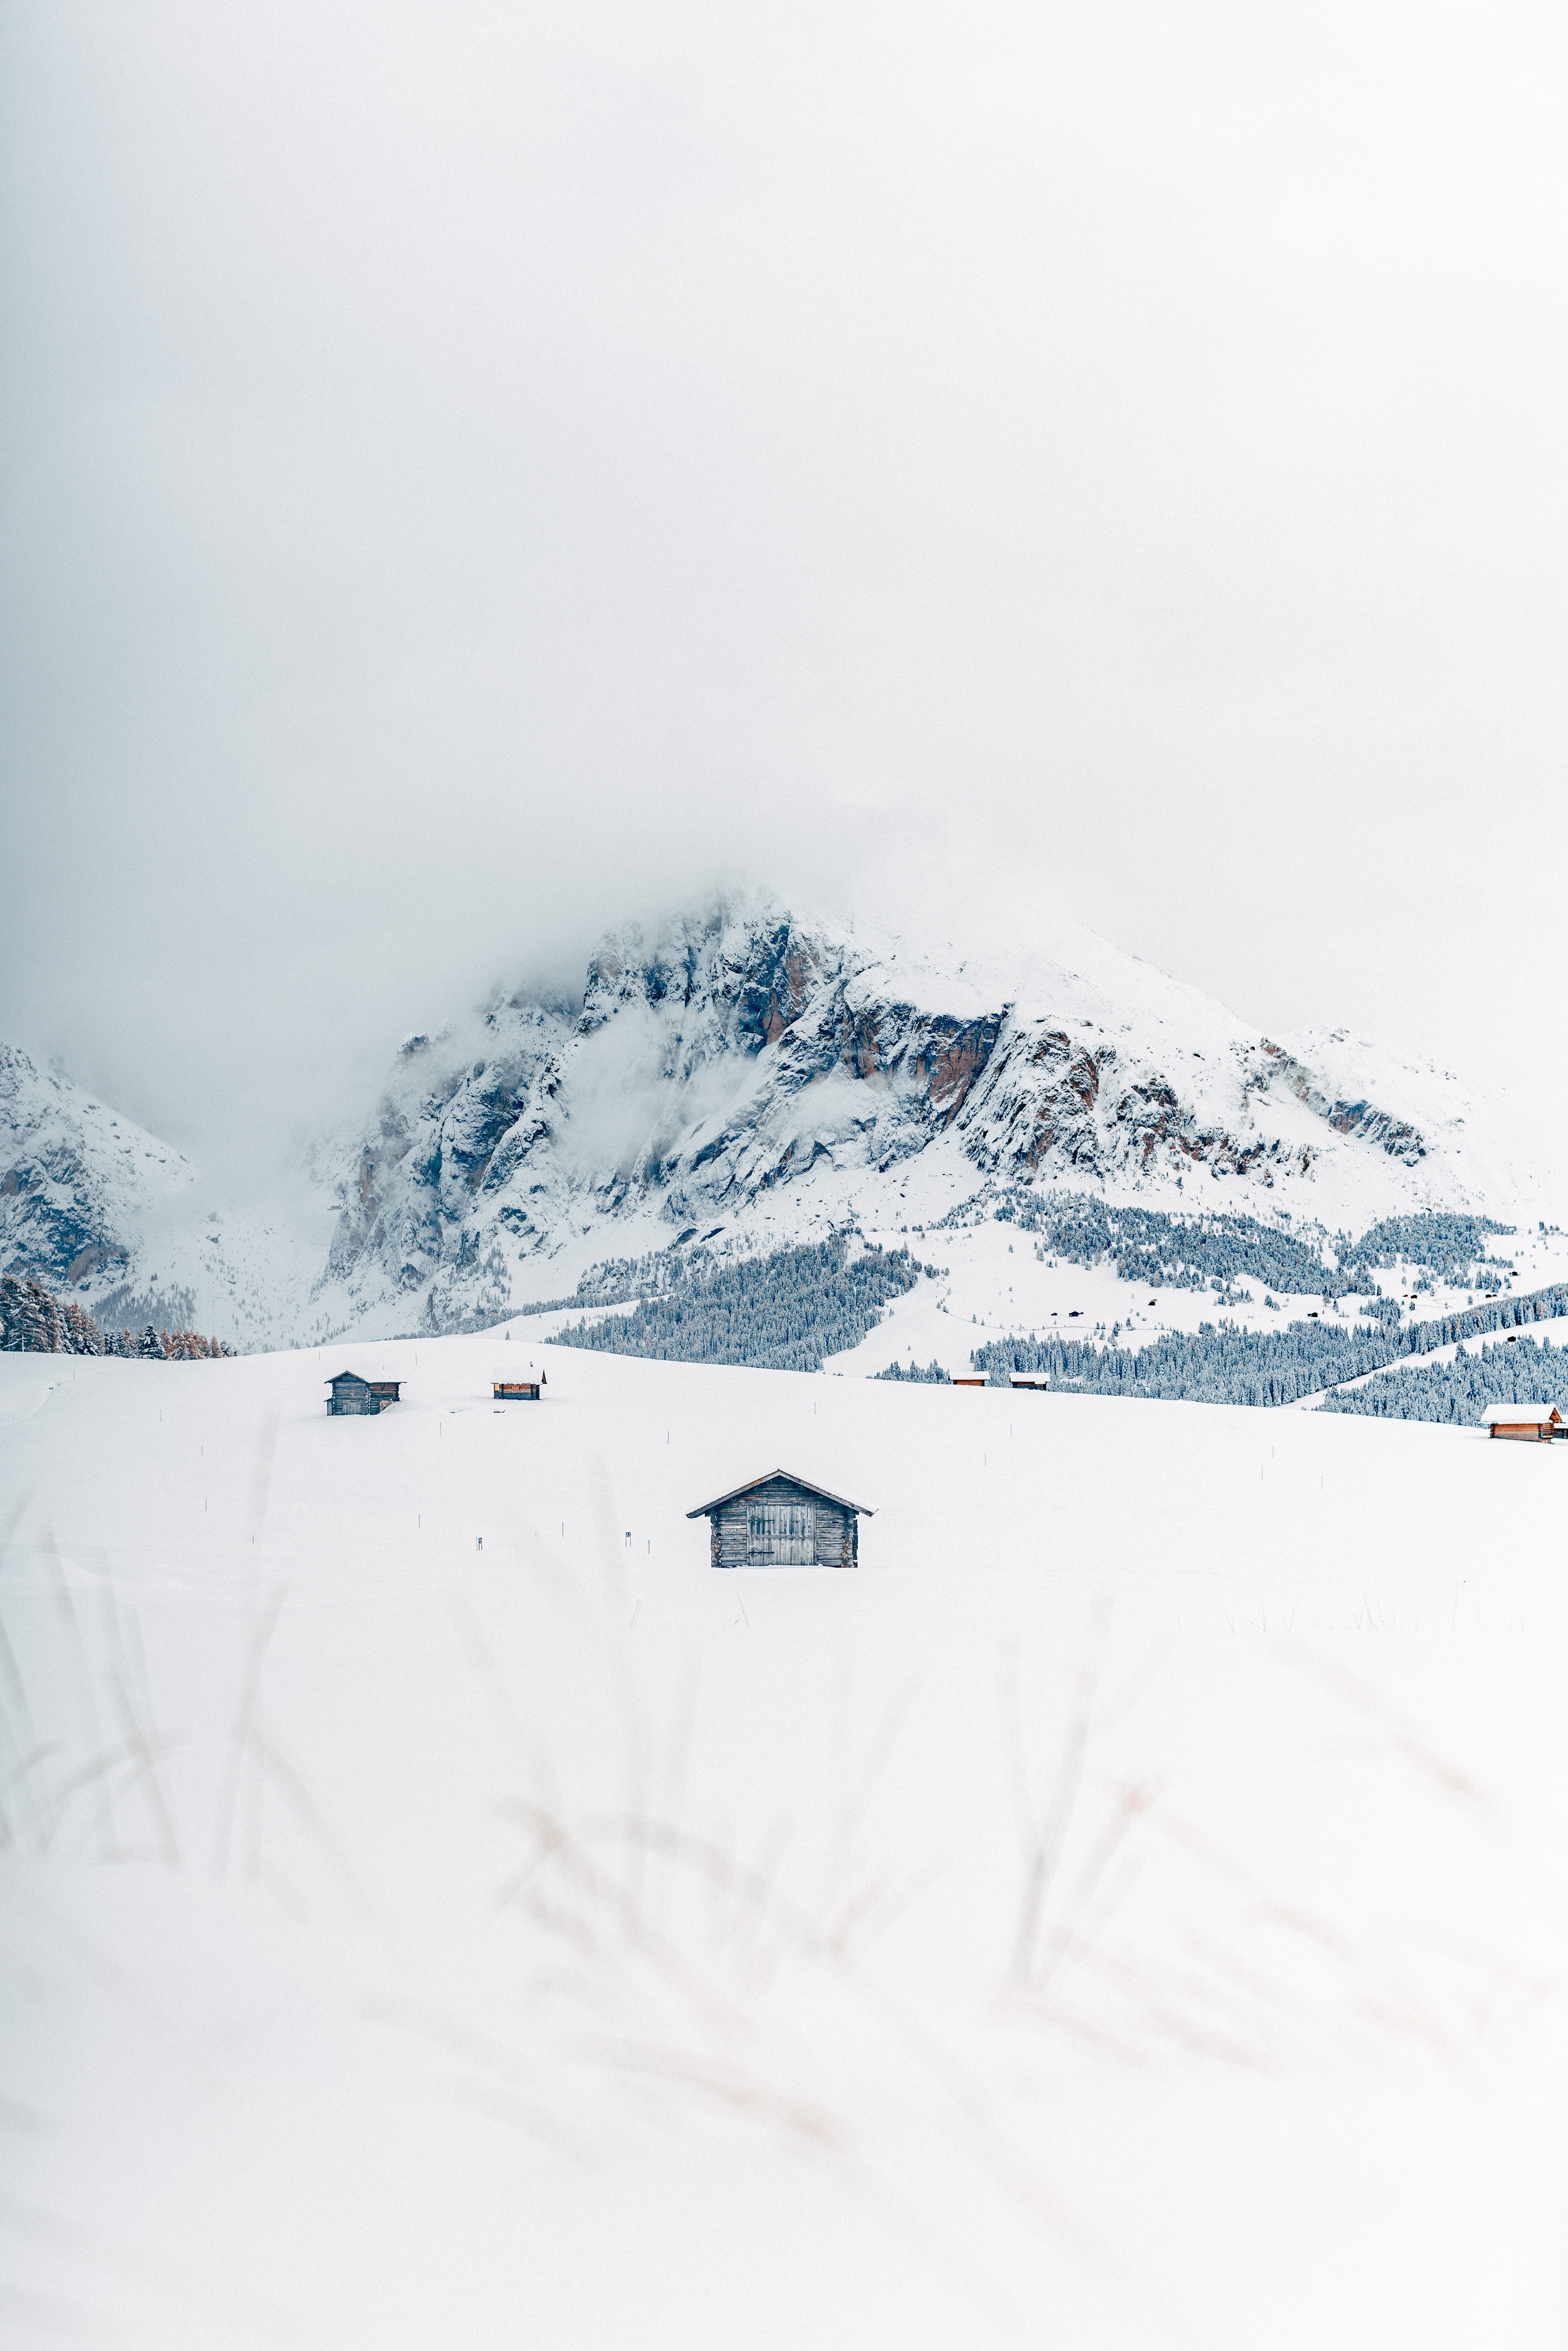 Download PC Wallpaper landscape, winter, nature, houses, mountains, snow, small houses